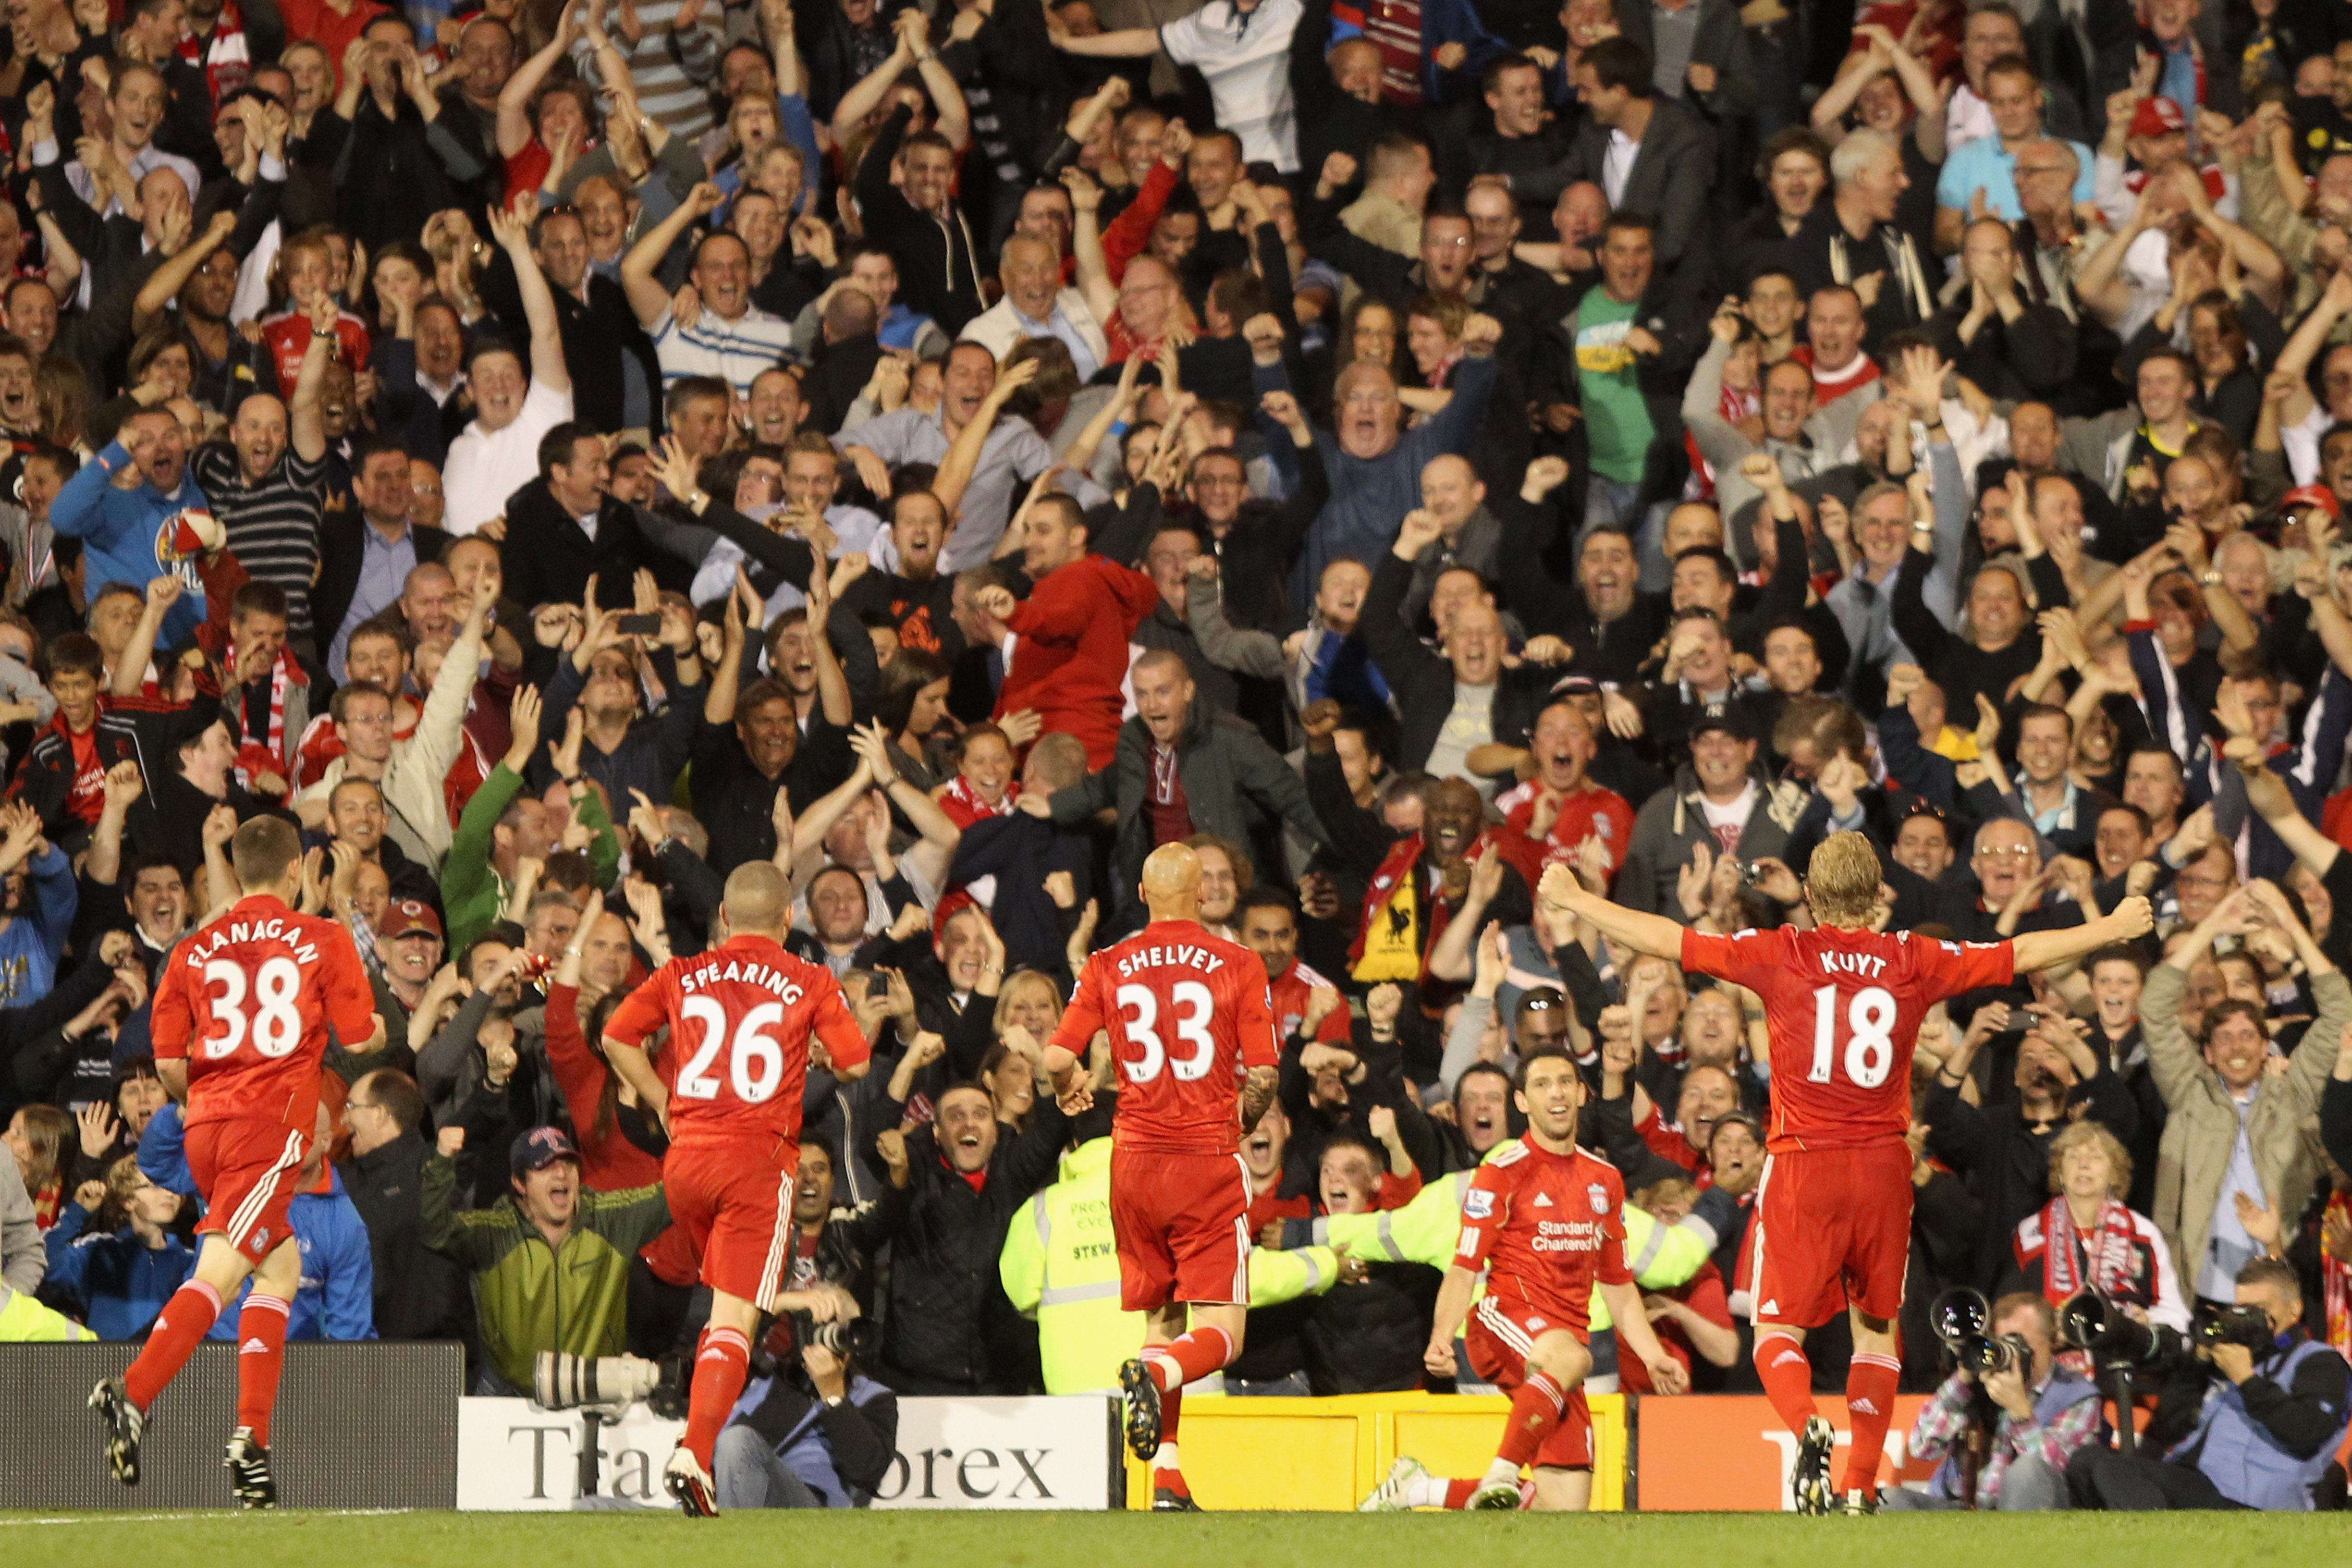 LONDON, ENGLAND - MAY 09:  Maxi Rodriguez of Liverpool celebrates scoring in front of the Liverpool fans during the Barclays Premier League match between Fulham and Liverpool at Craven Cottage on May 9, 2011 in London, England.  (Photo by Scott Heavey/Get